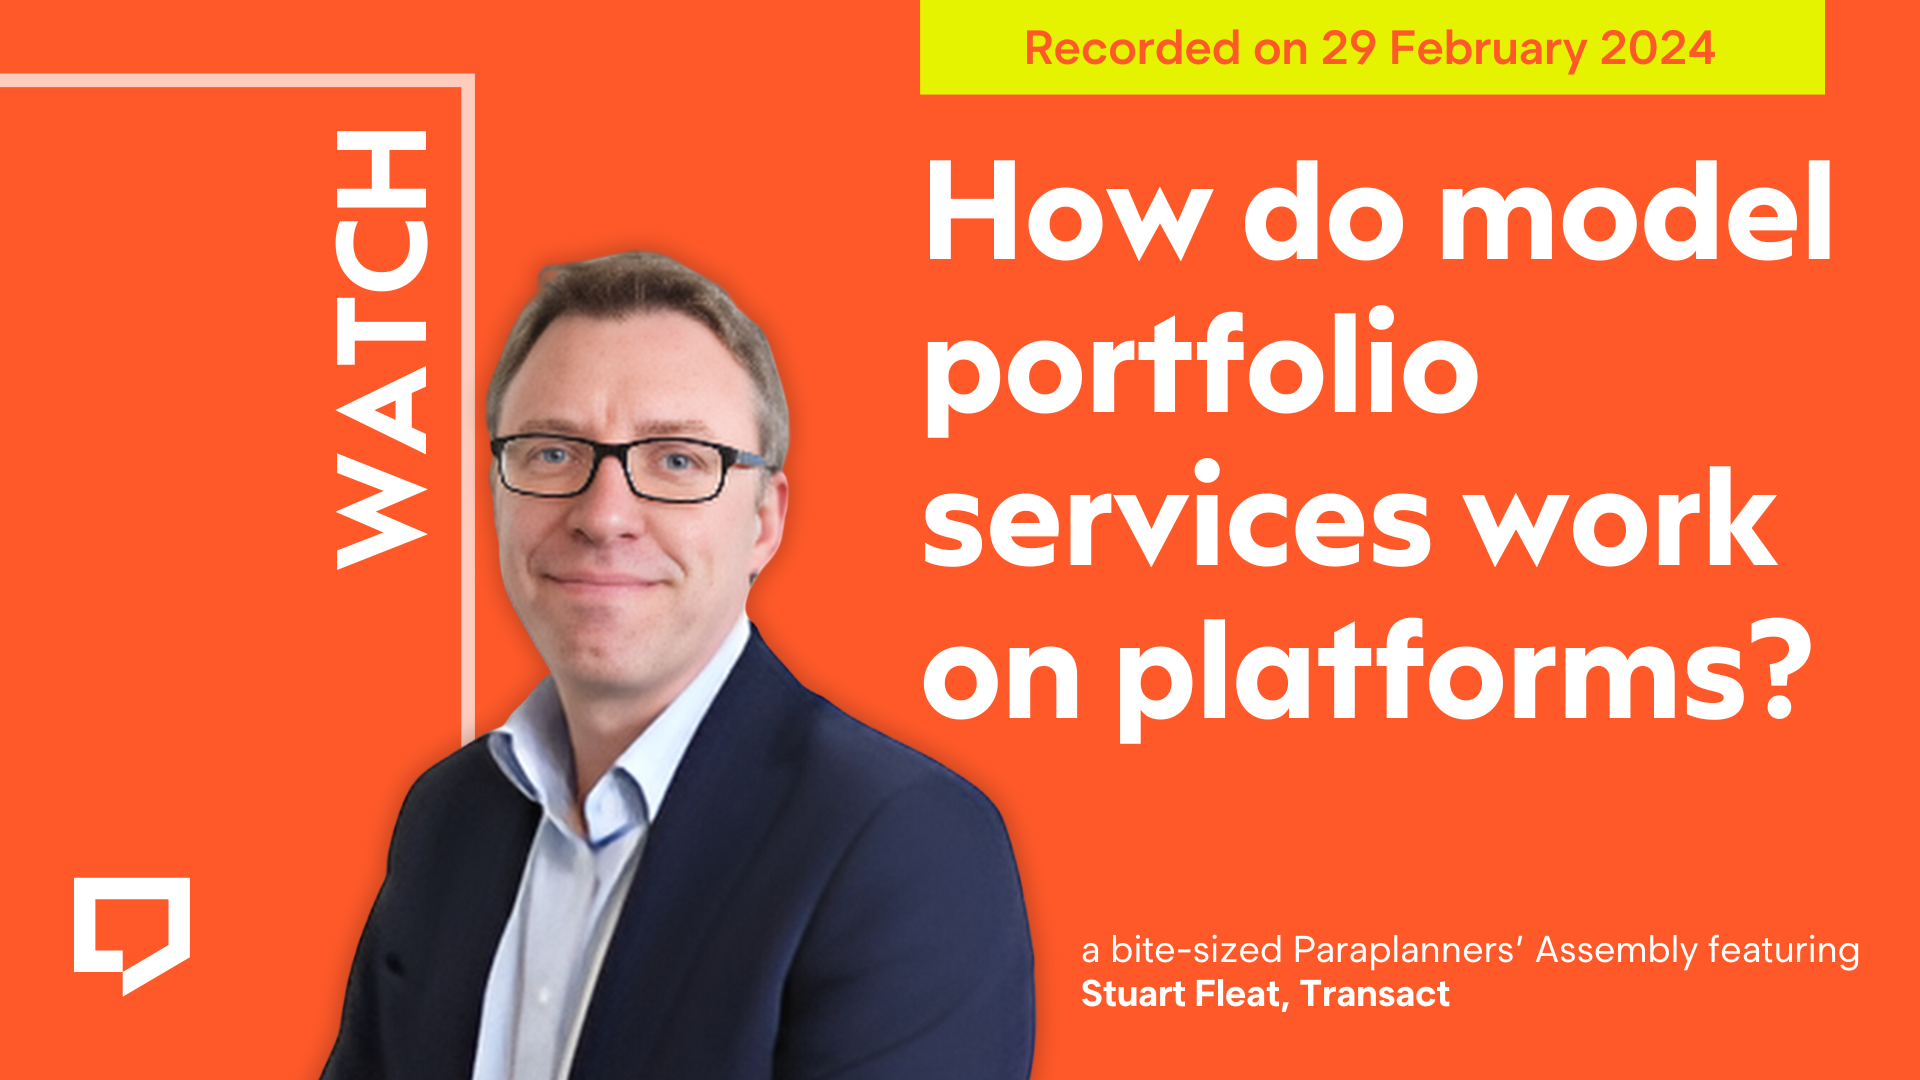 How do model portfolio services work on platforms? A bite-sized Paraplanners' Assembly with Stuart Fleat of Transact. Recorded on 29 February 2024.